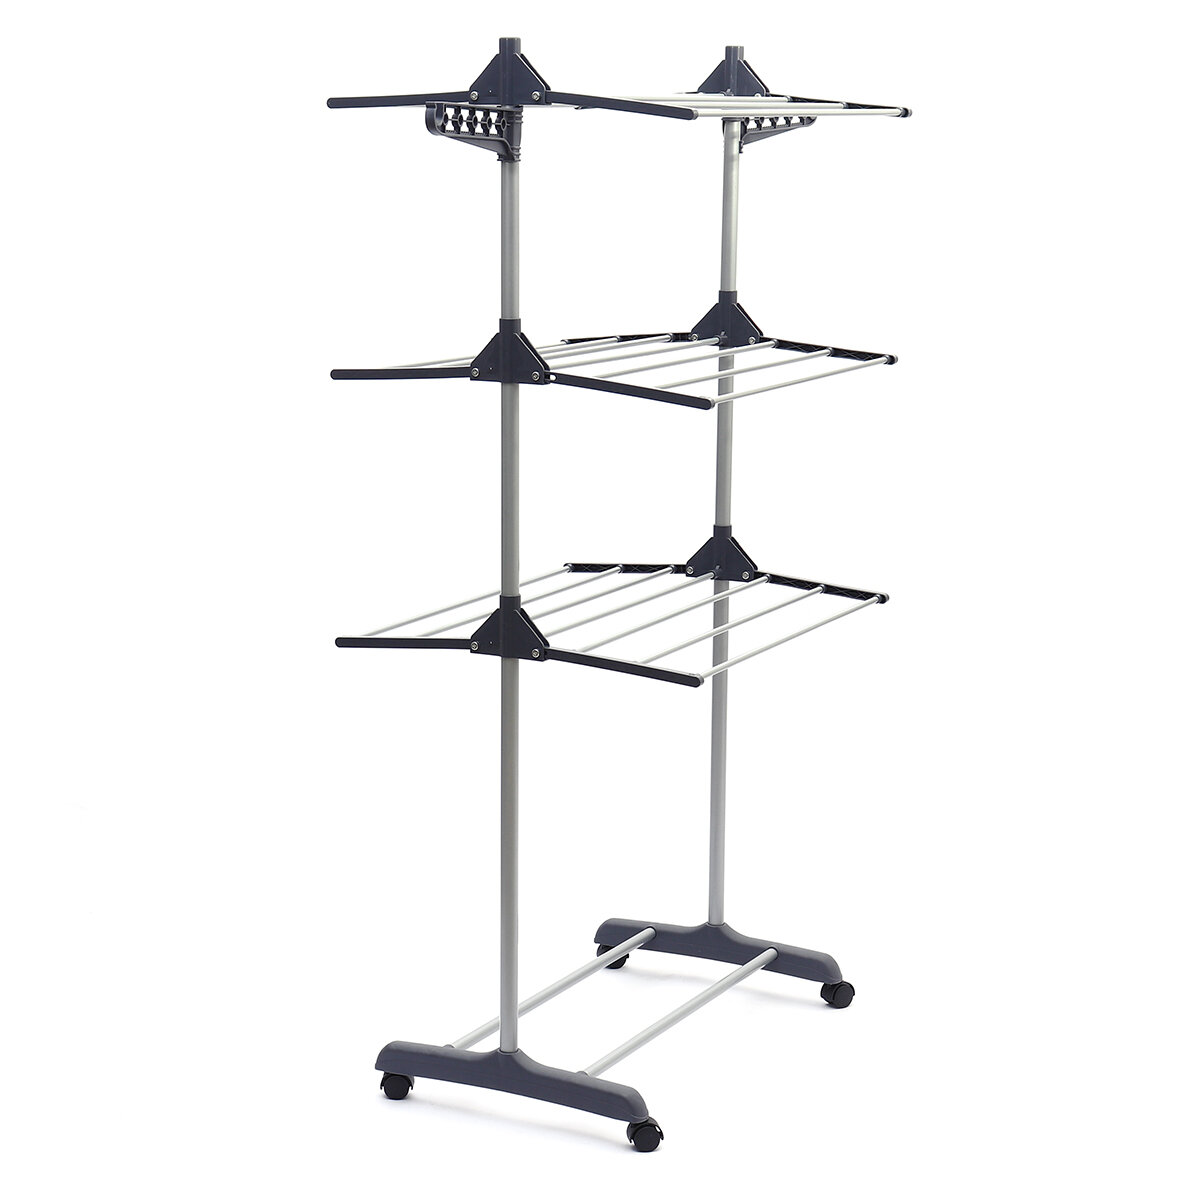 Image of 4 Floors Foldable Clothes Drying Rack With 4 Wheels For Indoor/Outdoor Use